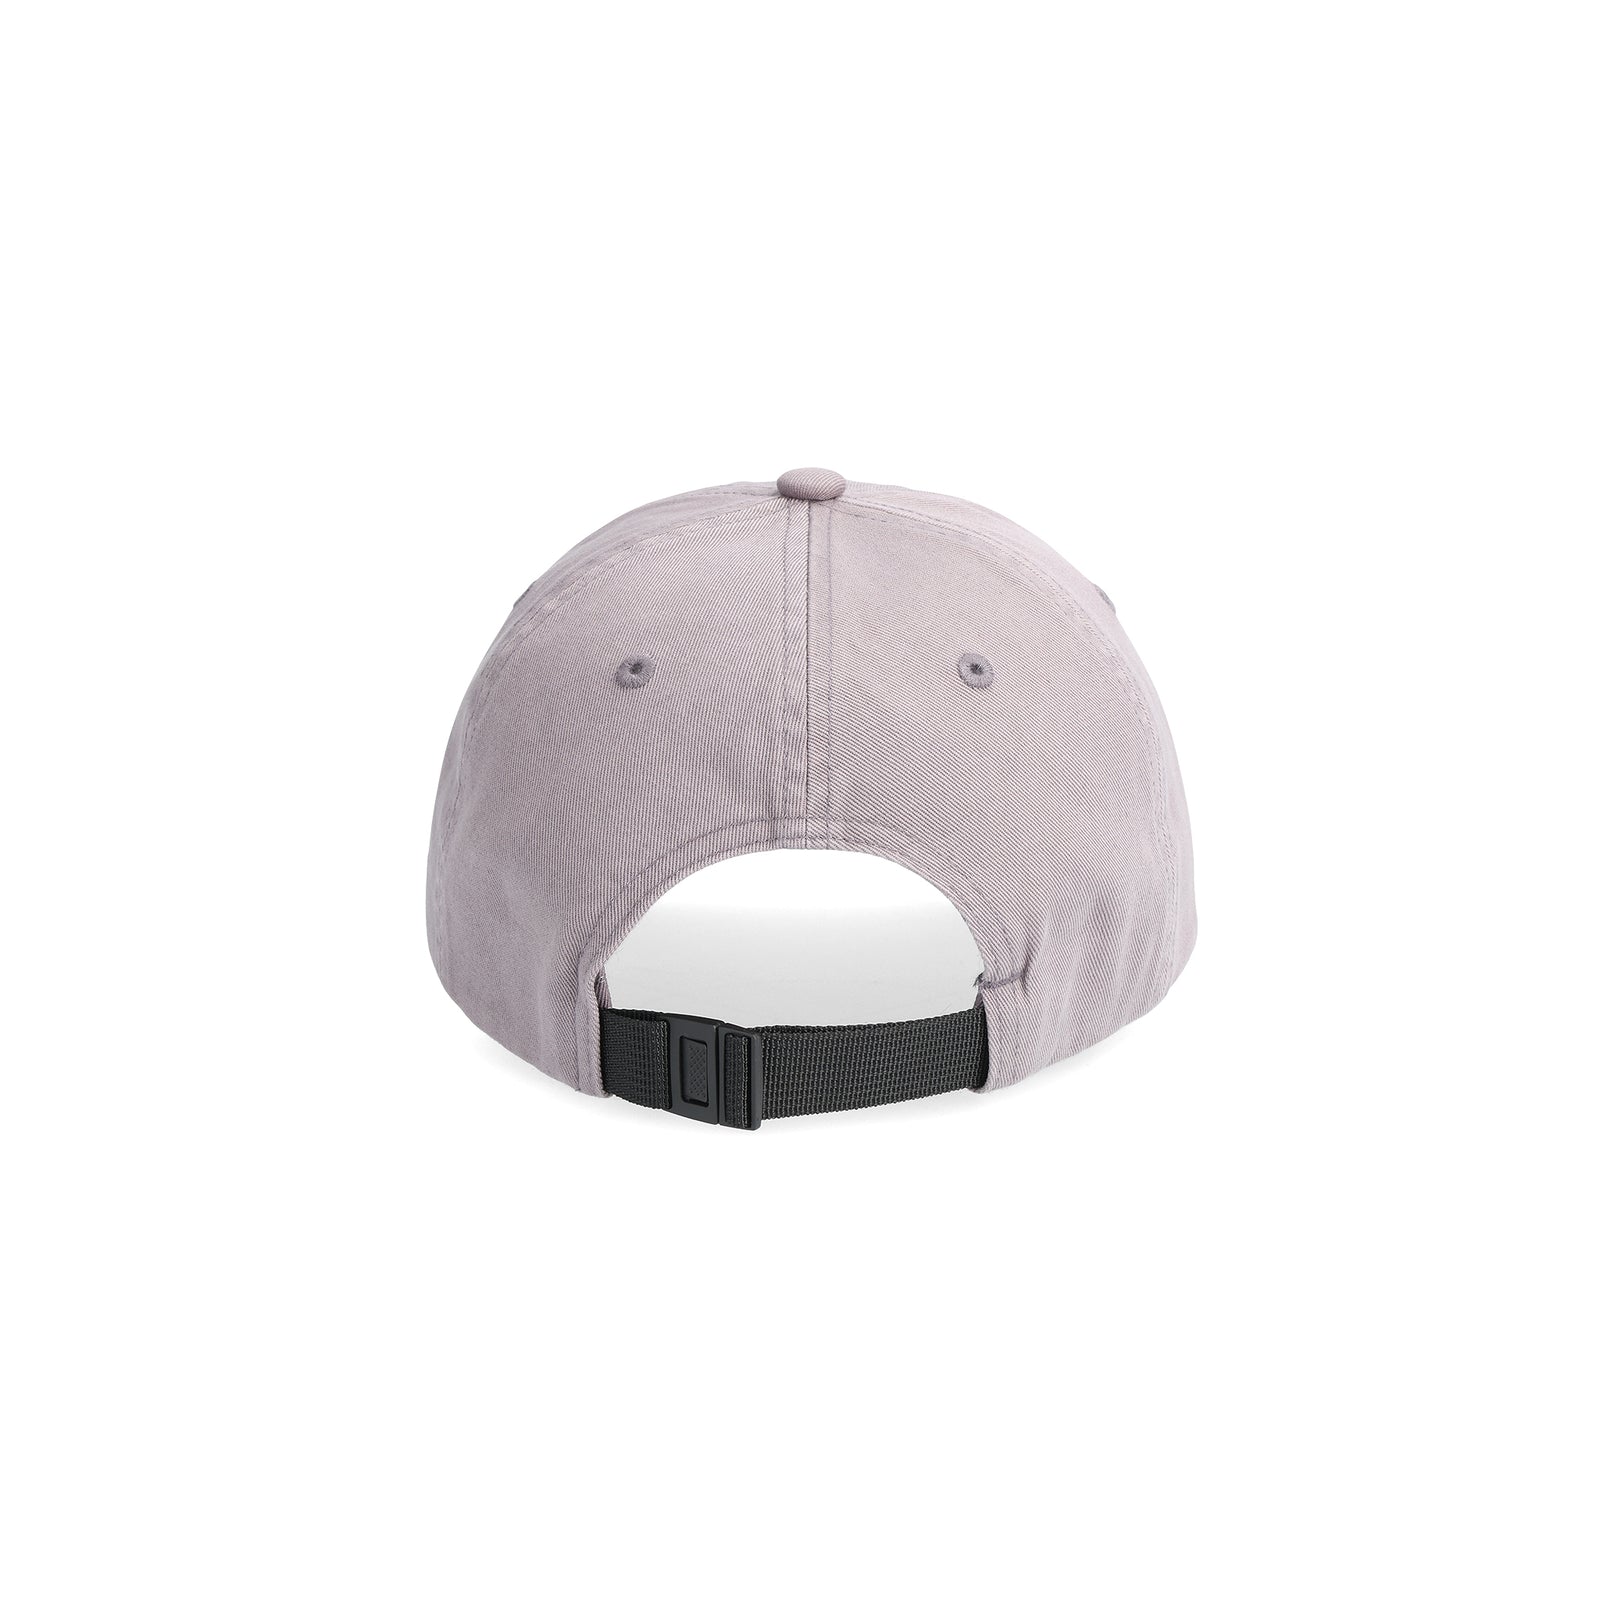 Back View of Topo Designs Dirt Ballcap in "Charcoal"